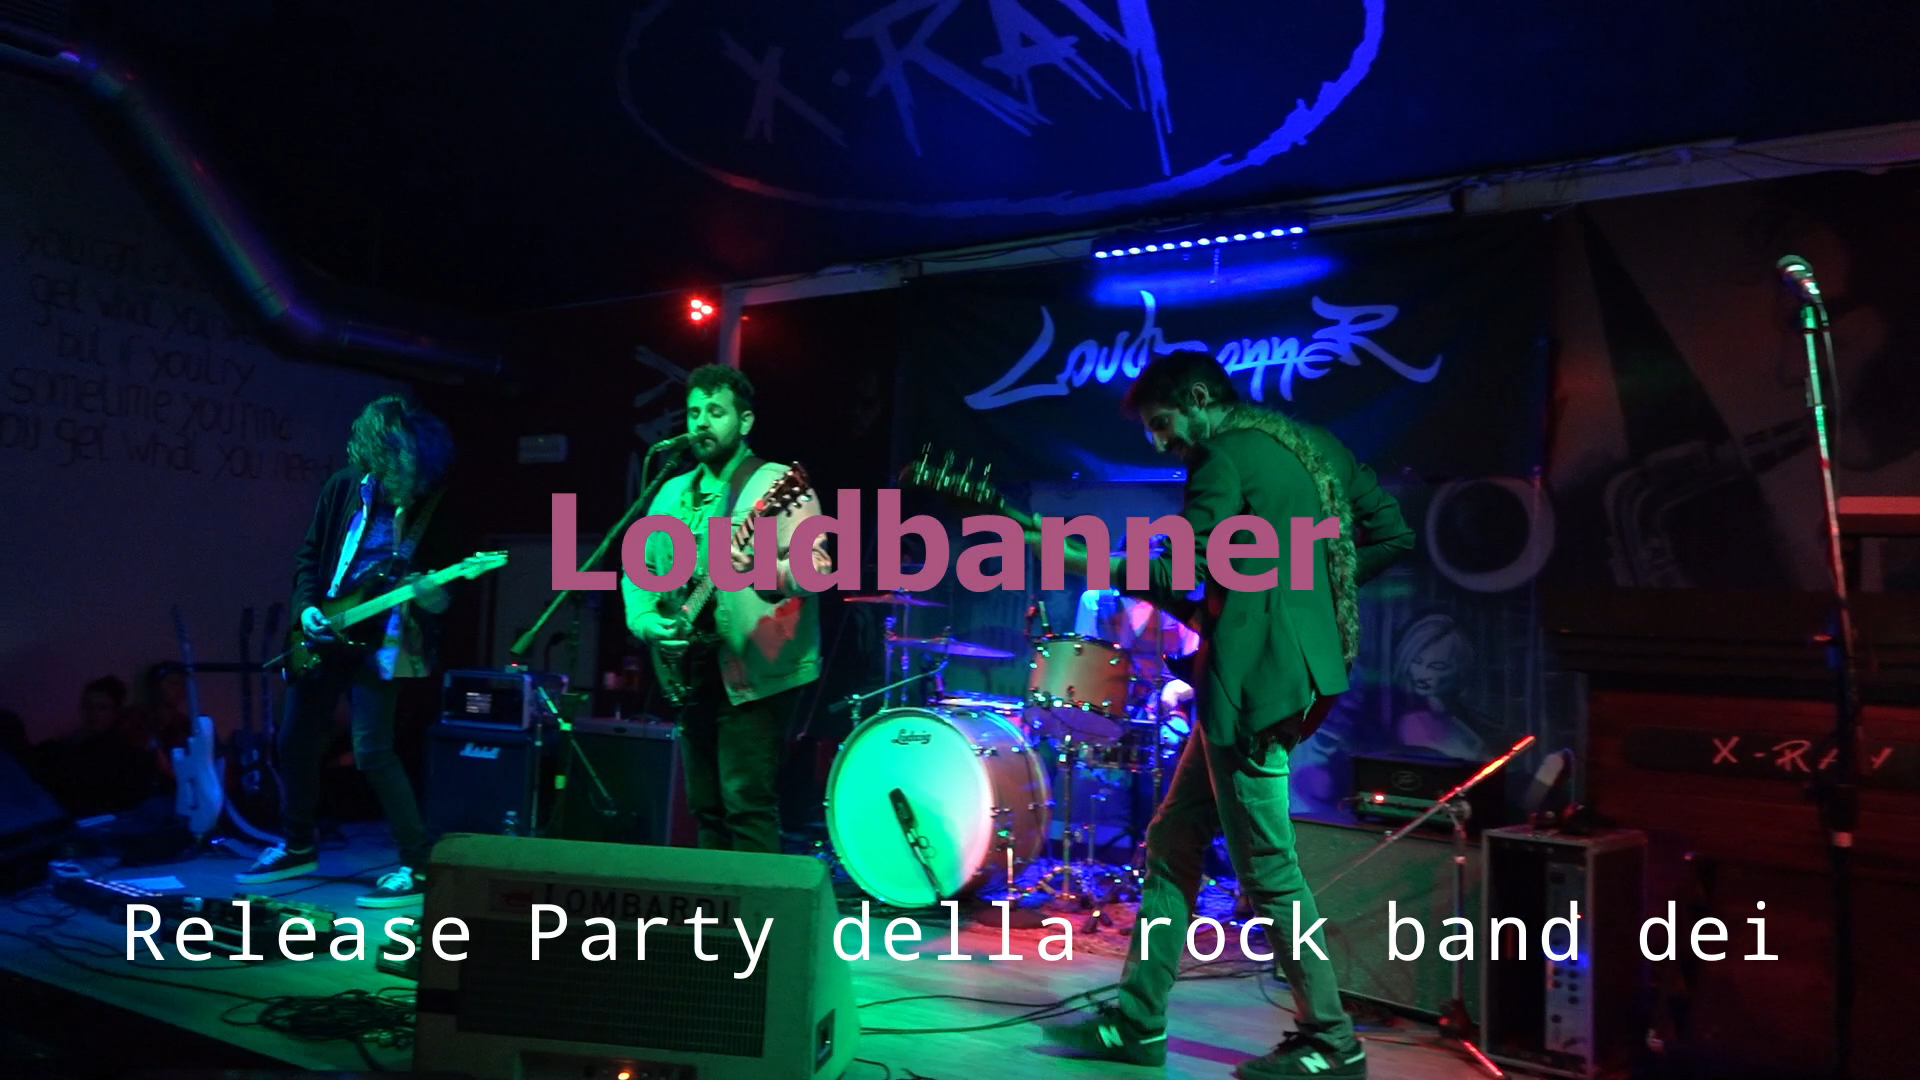 Release Party LoudBanner: Sold Out per il Release Party dei Loudbanner all’ X-Ray Pub di Forlì